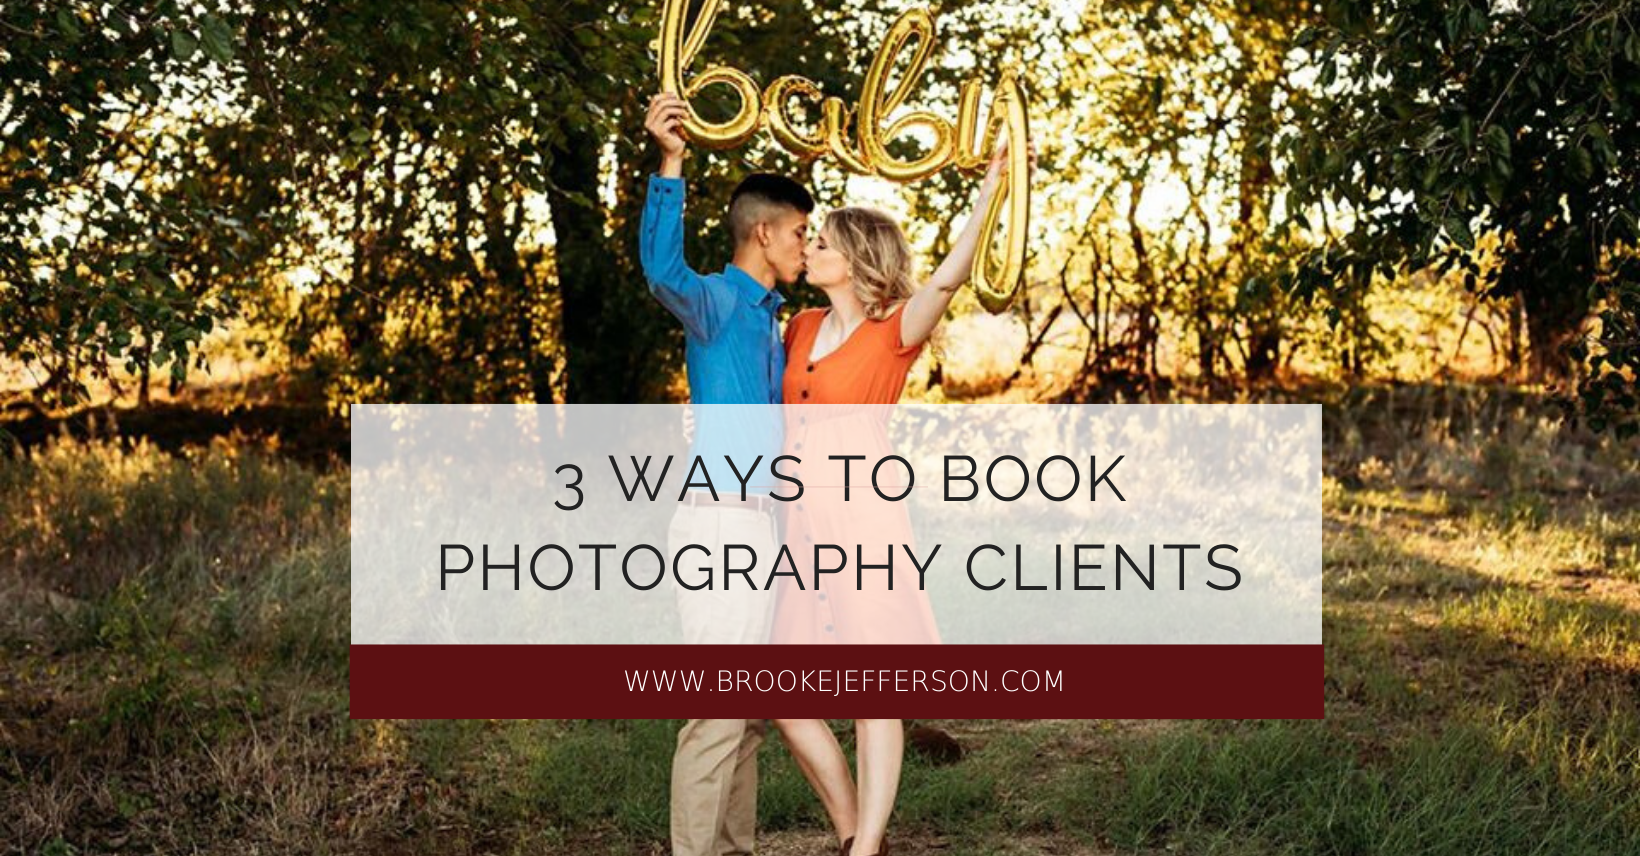 Are you struggling to book photography clients? I want to provide you with 3 ways to book clients today. Whether you're in the beginning stages or have been in business for years, this is for you.